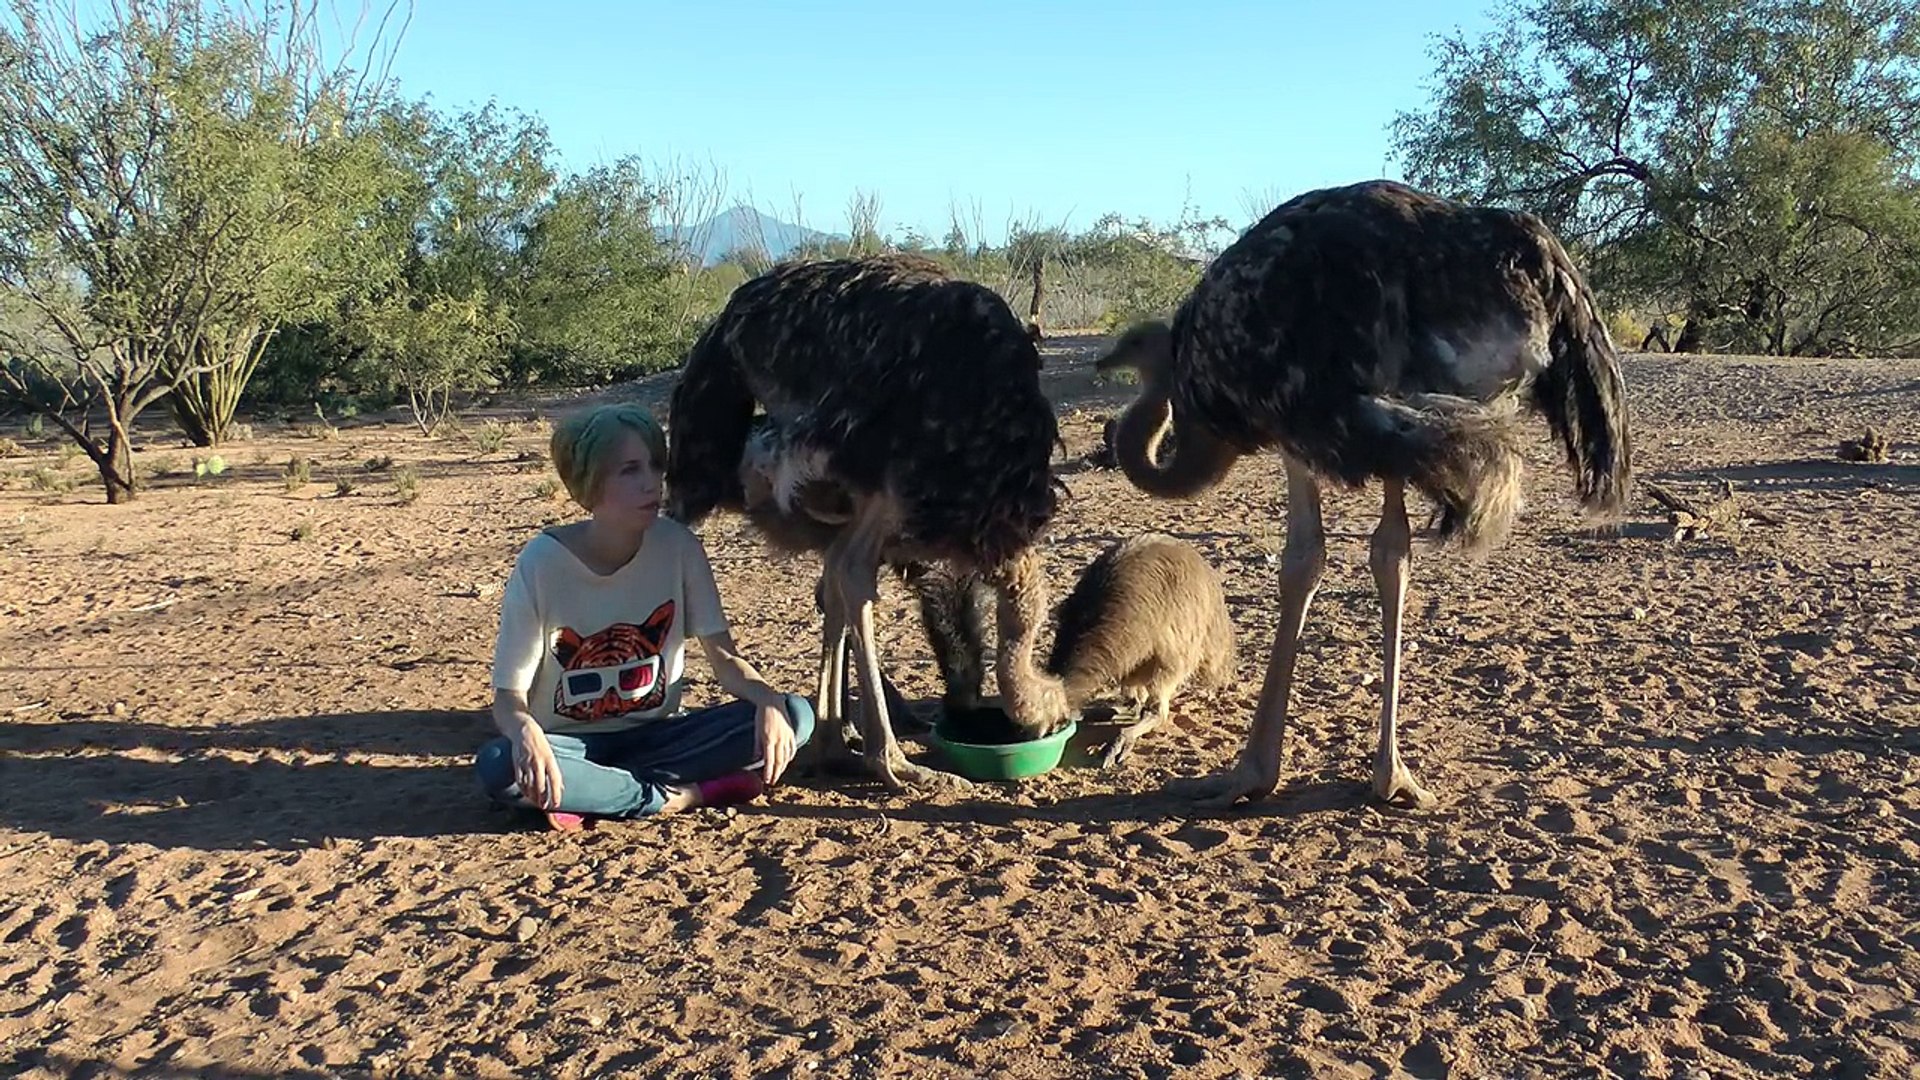 Interacting with my pet Ostriches, Emu, & Kangal dog